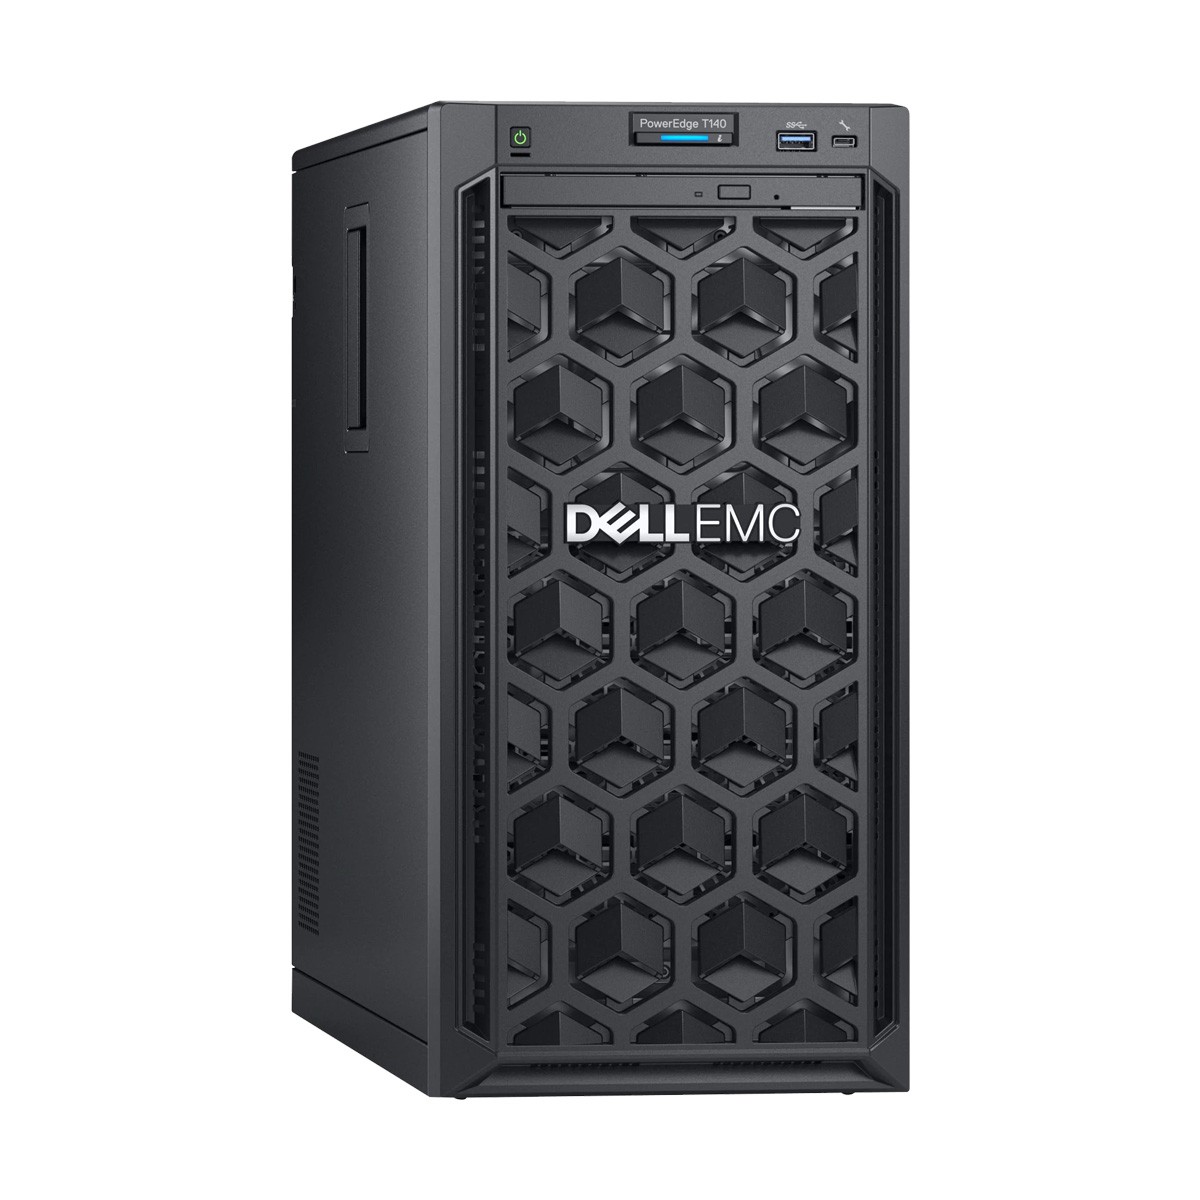 dell power manager service